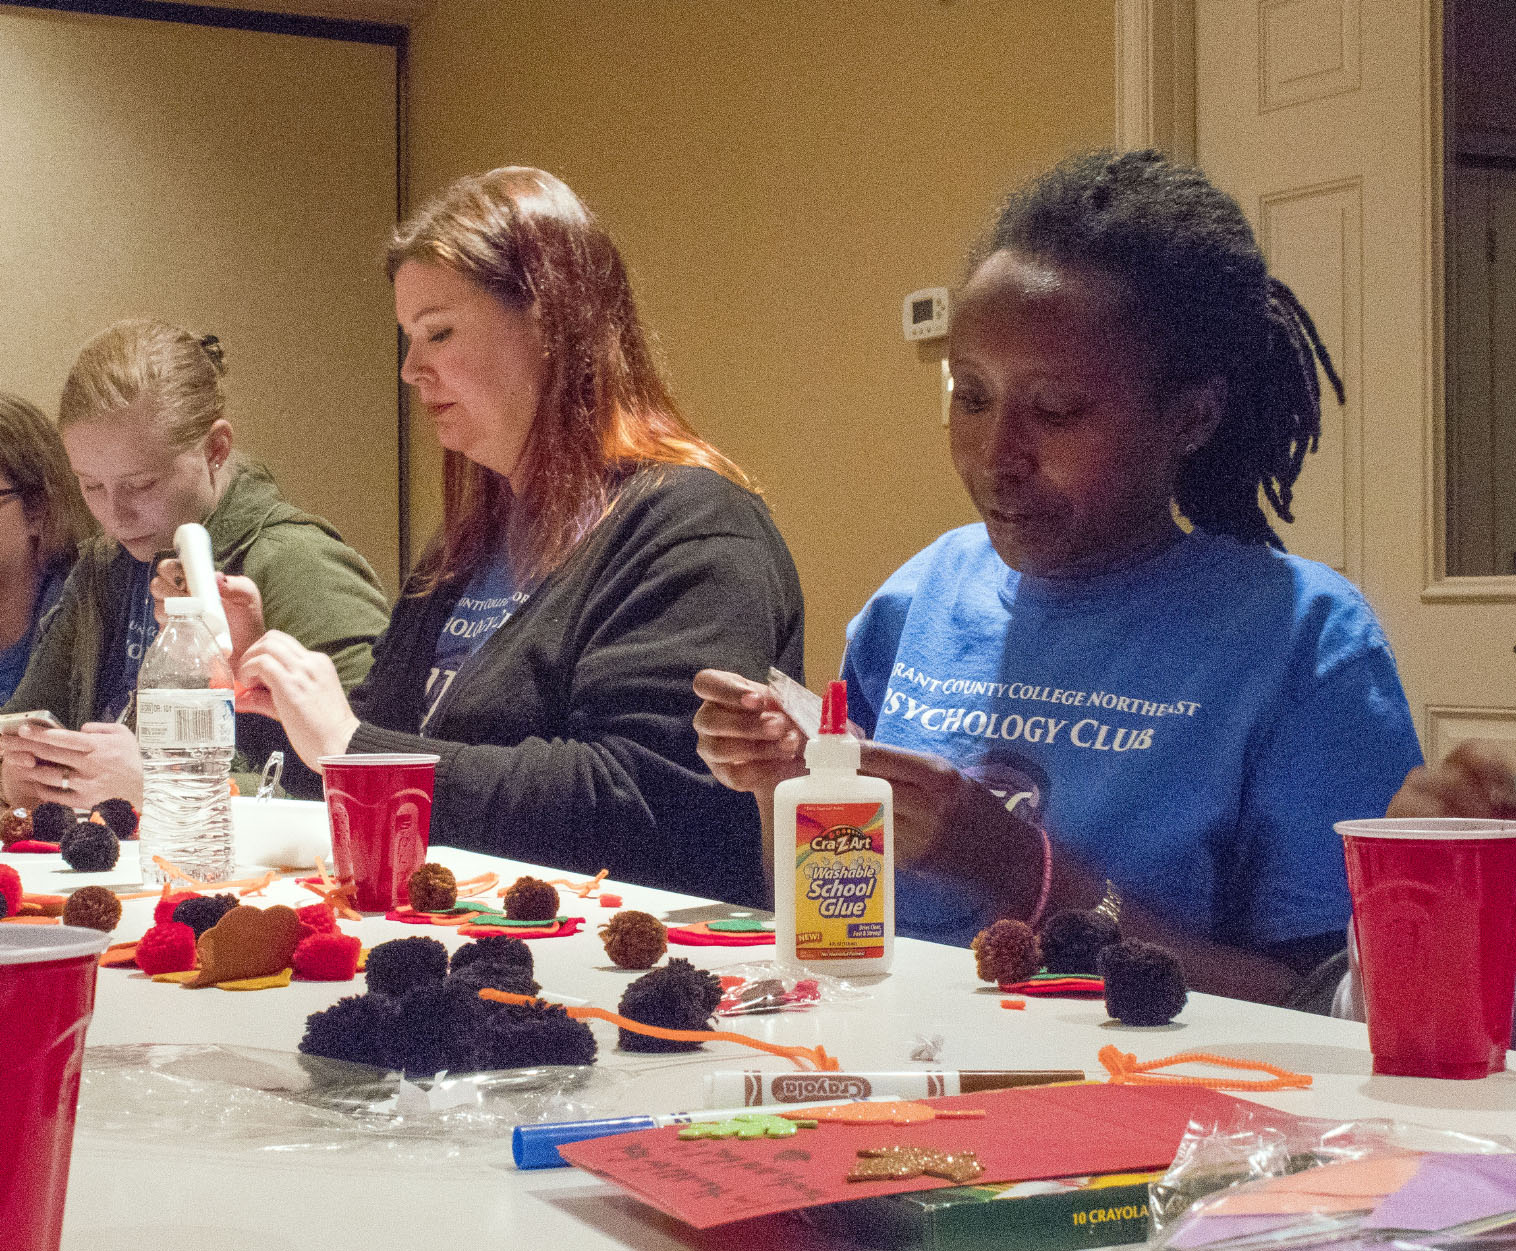 NE students Elizabeth Harris, Molly Wright and Alice Muhindura volunteer with the Psi Beta and Psychology Club at an after-school program with local children Nov. 10 in North Richland Hills.